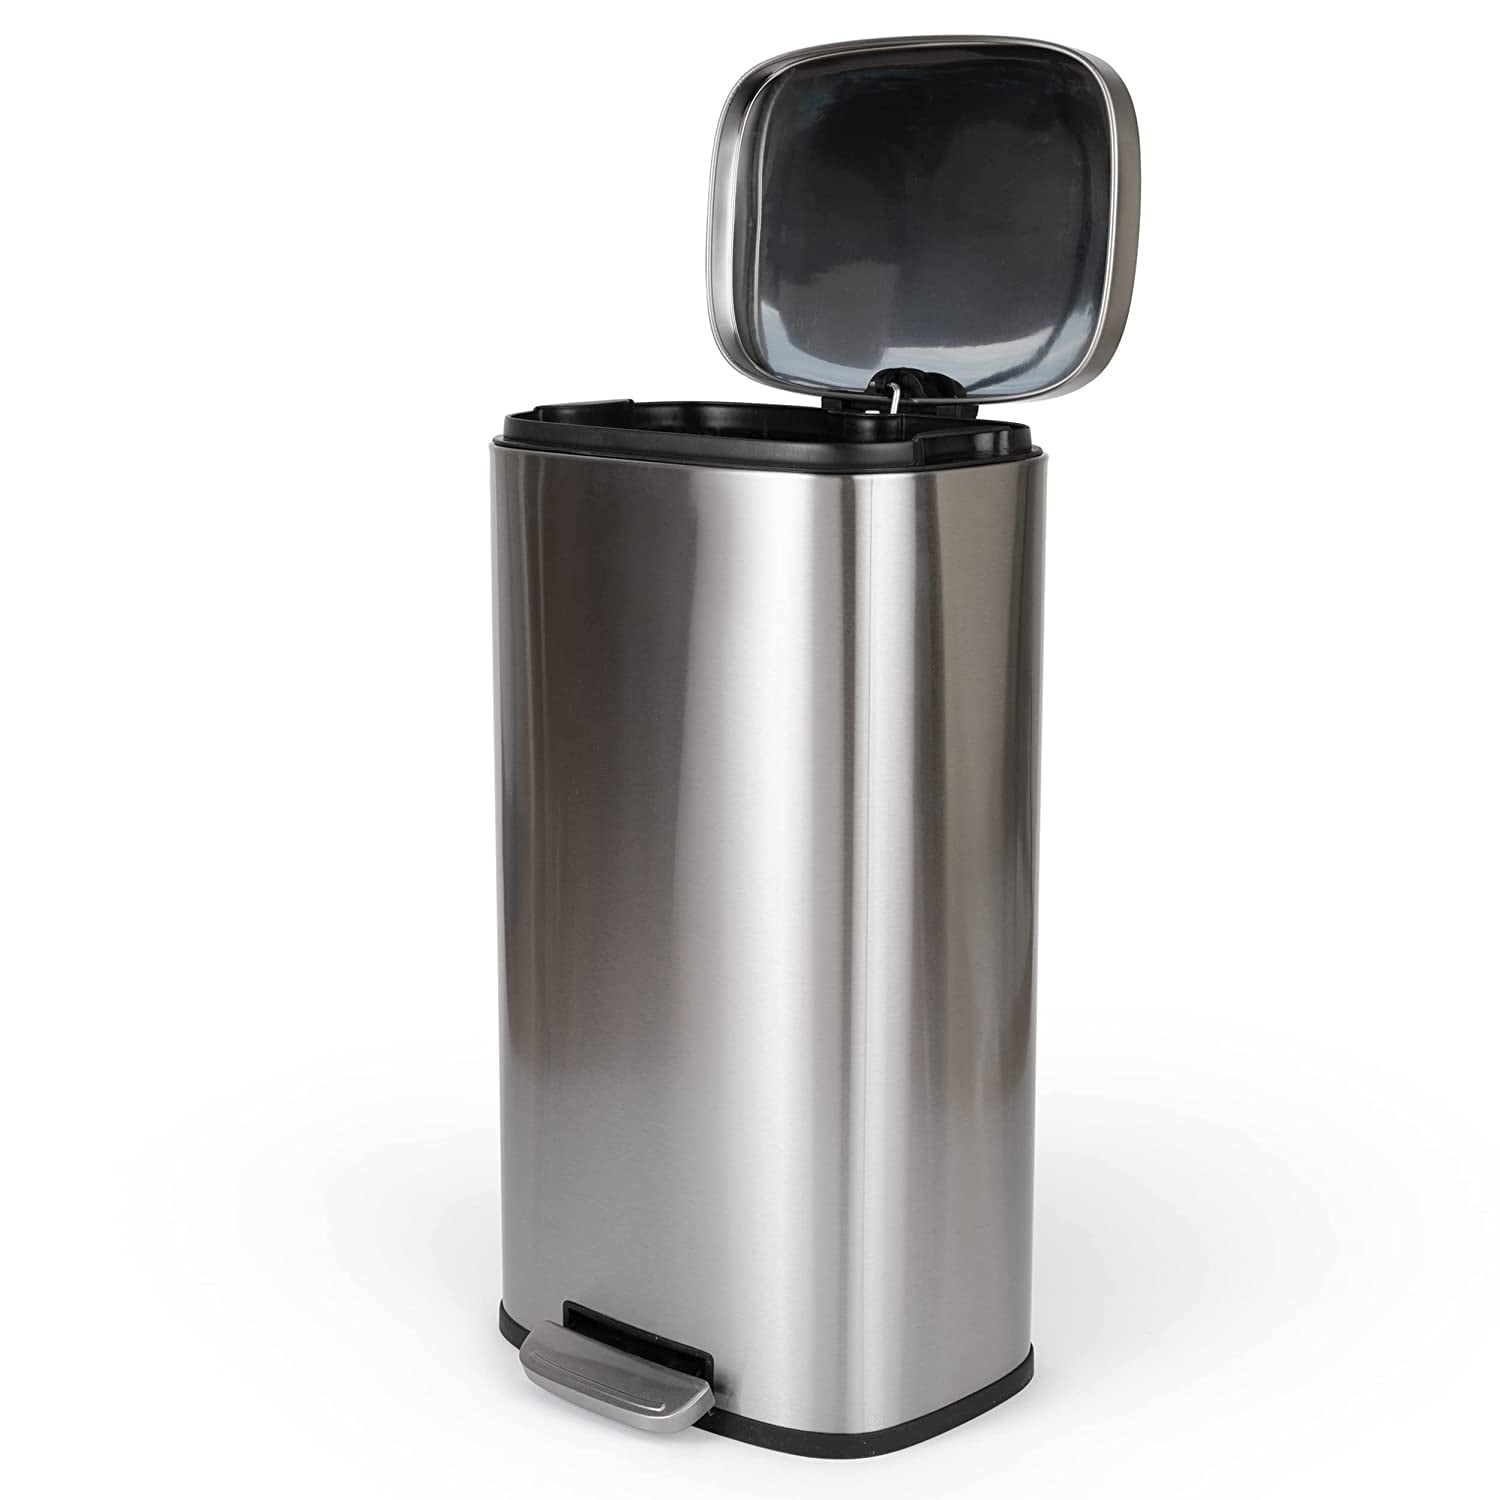 https://ak1.ostkcdn.com/images/products/is/images/direct/5c469b65280642626883ea90e86319229202a6c9/Step-On-Trash-Can%2C-30-Liter-%287.9-Gal%29-Metal-Garbage-Bin%2C-Soft-Closing-Lid.jpg